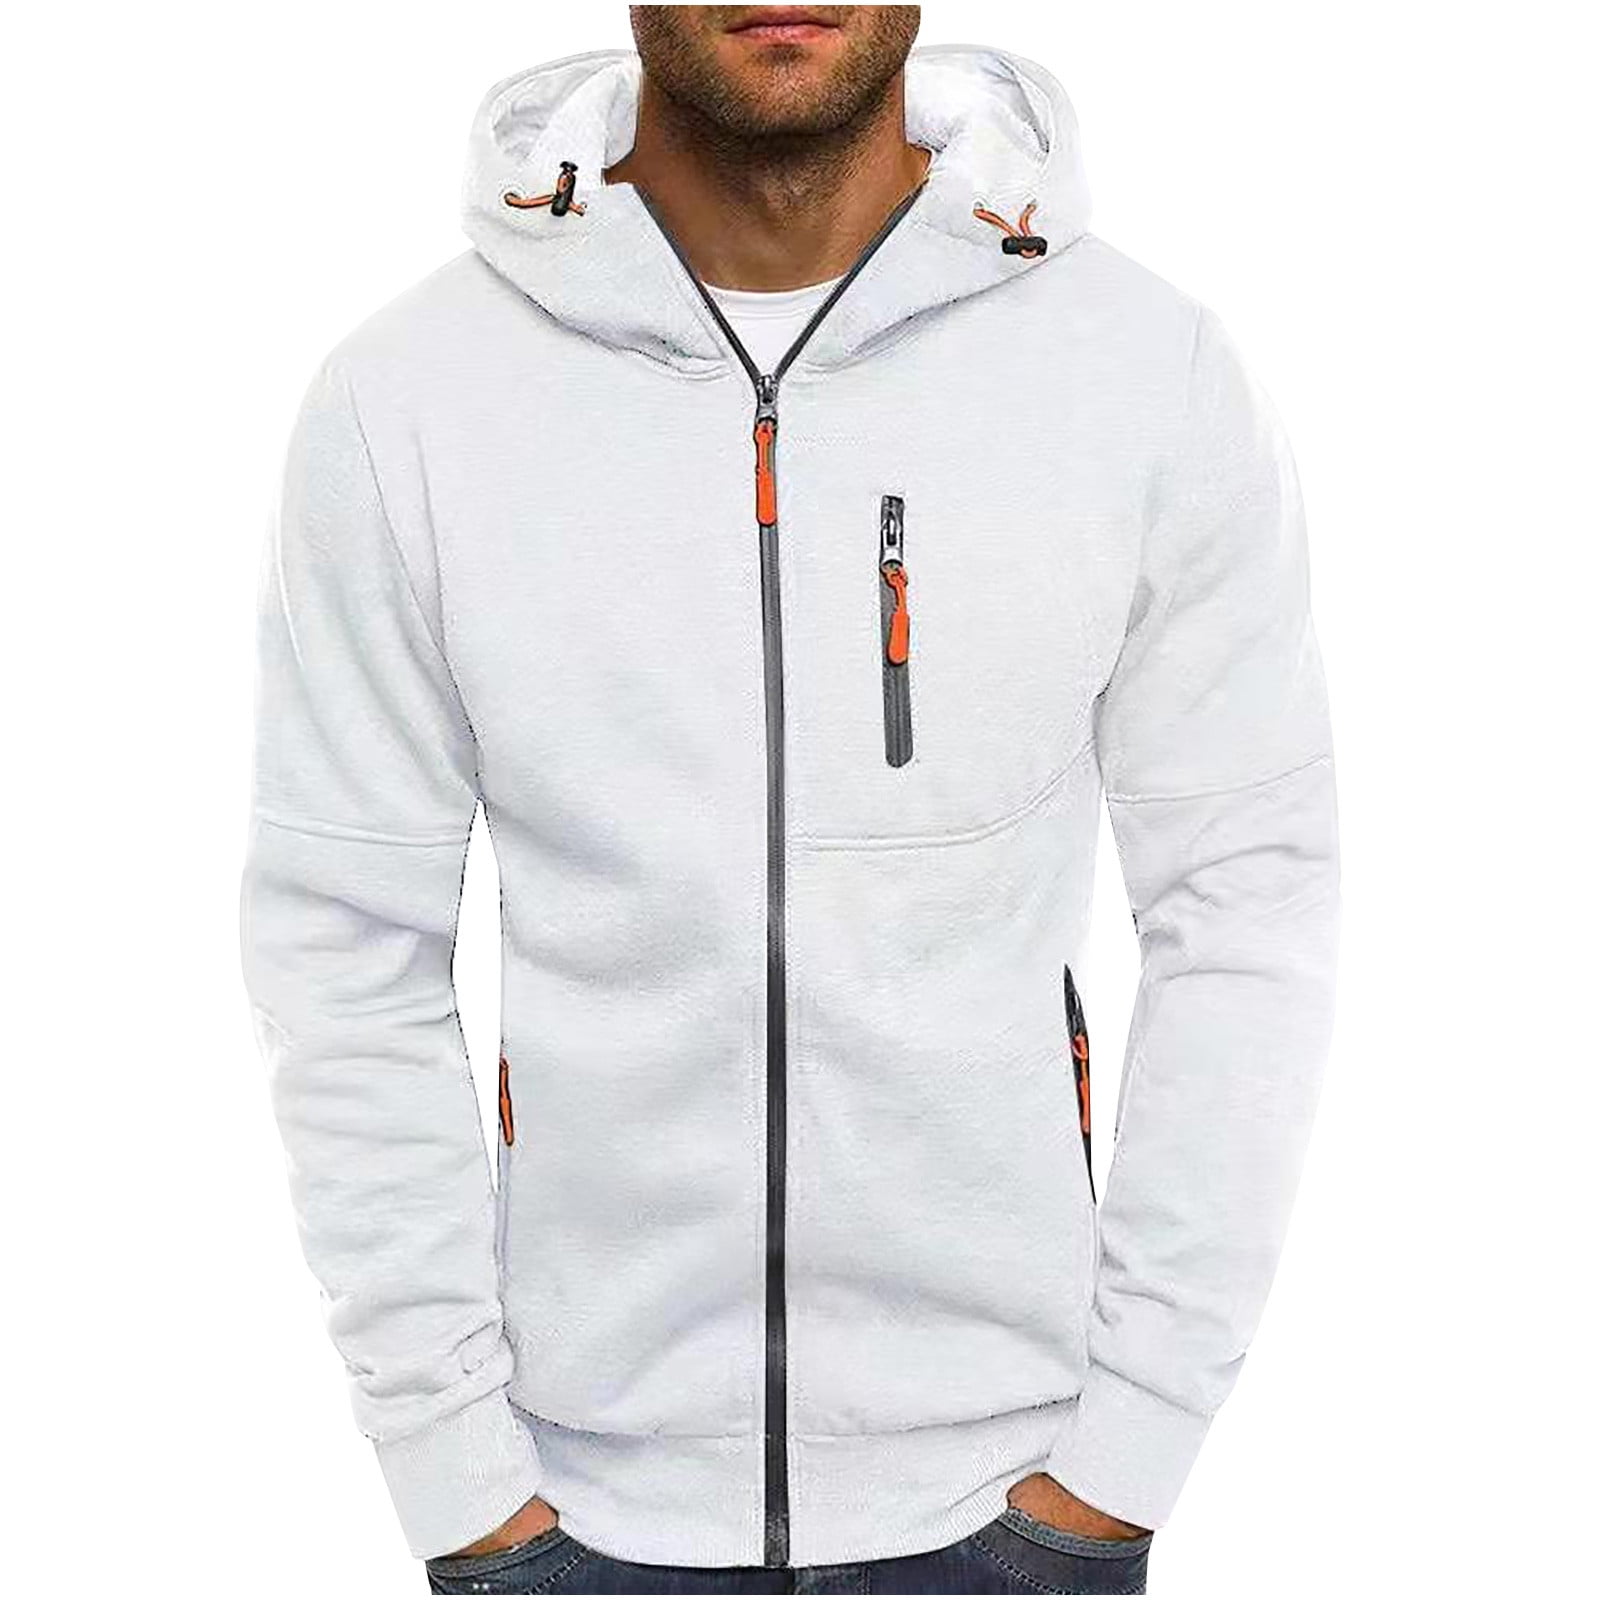 Classic Gym Workout Hoodie Jacket for Men Comfy Fleece Long Sleeve ...